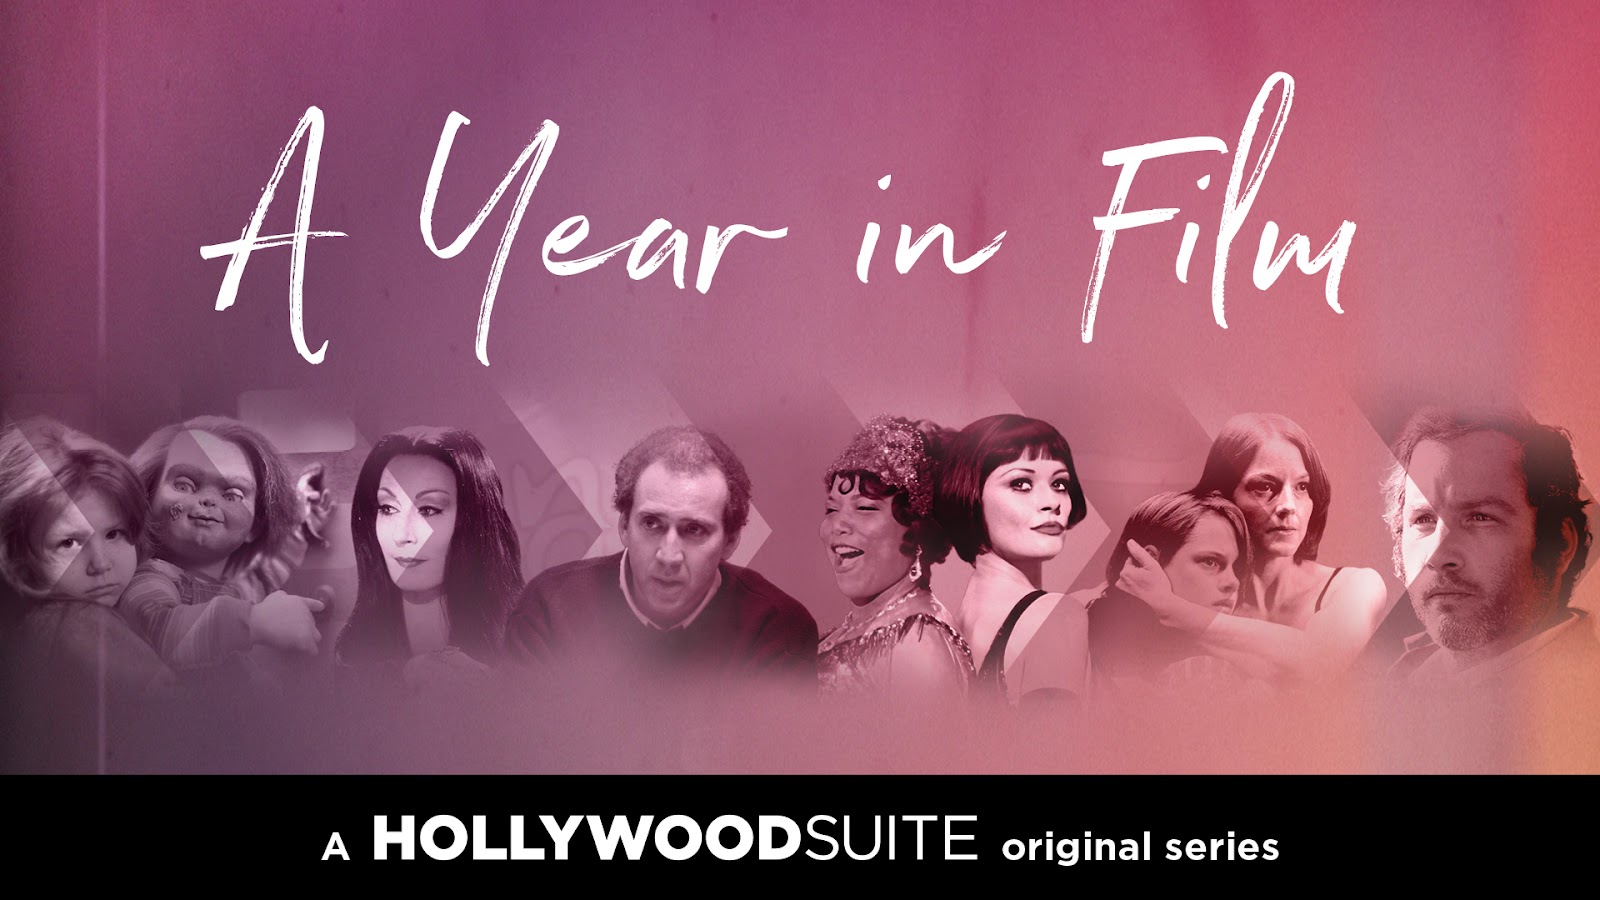 #FIRSTLOOK: SEASON FIVE OF “A YEAR IN FILM” COMING TO HOLLYWOOD SUITE